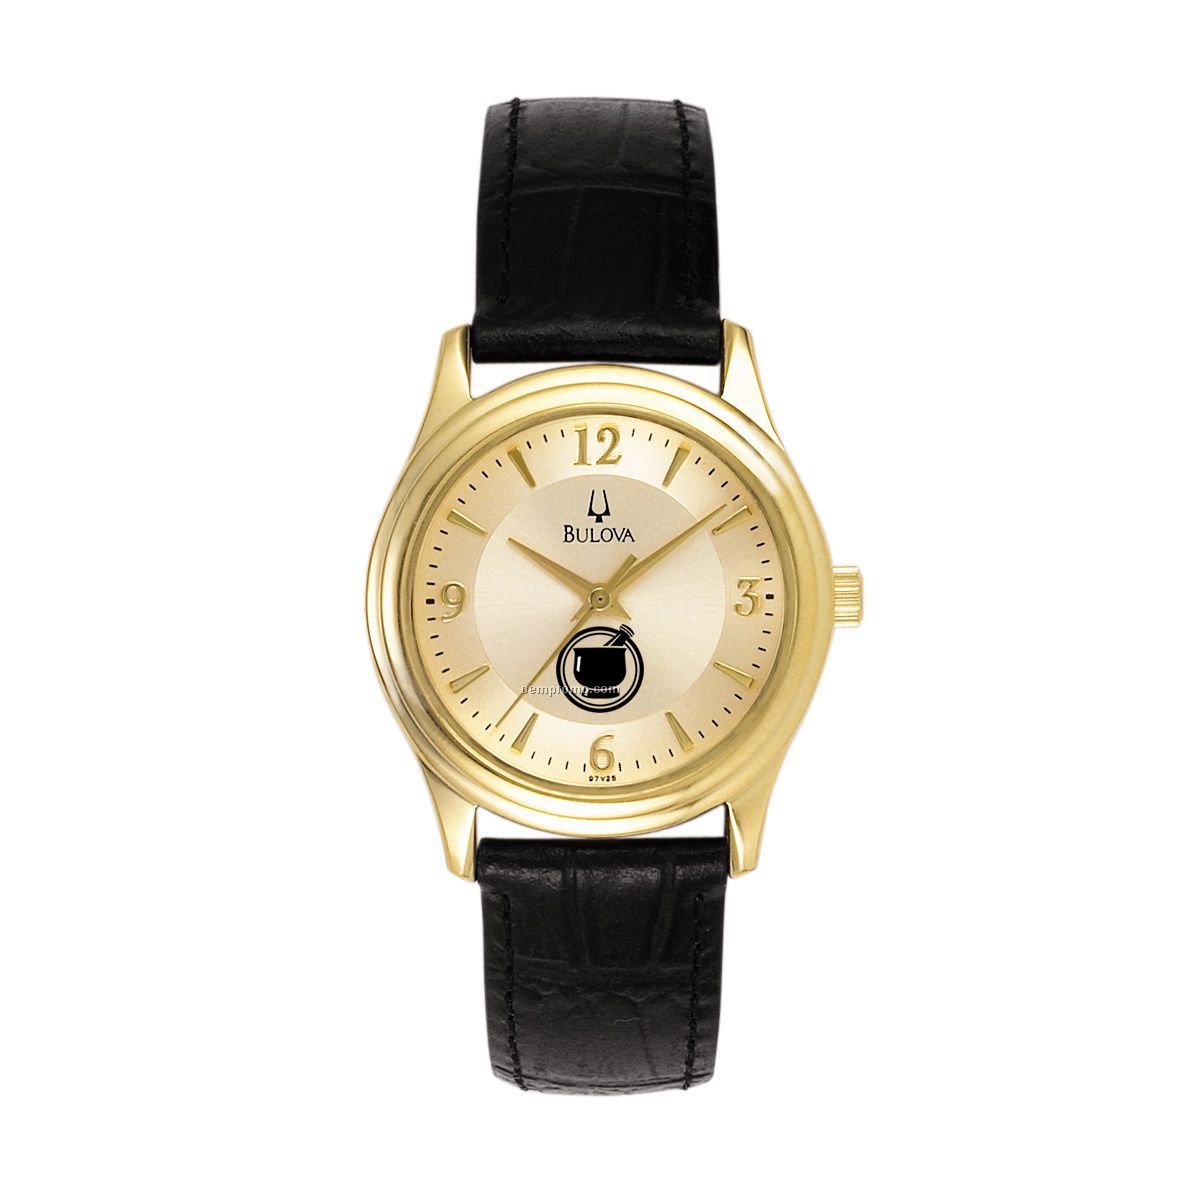 Comment: Ladies watch on wrist  World famous watches brands in Helena